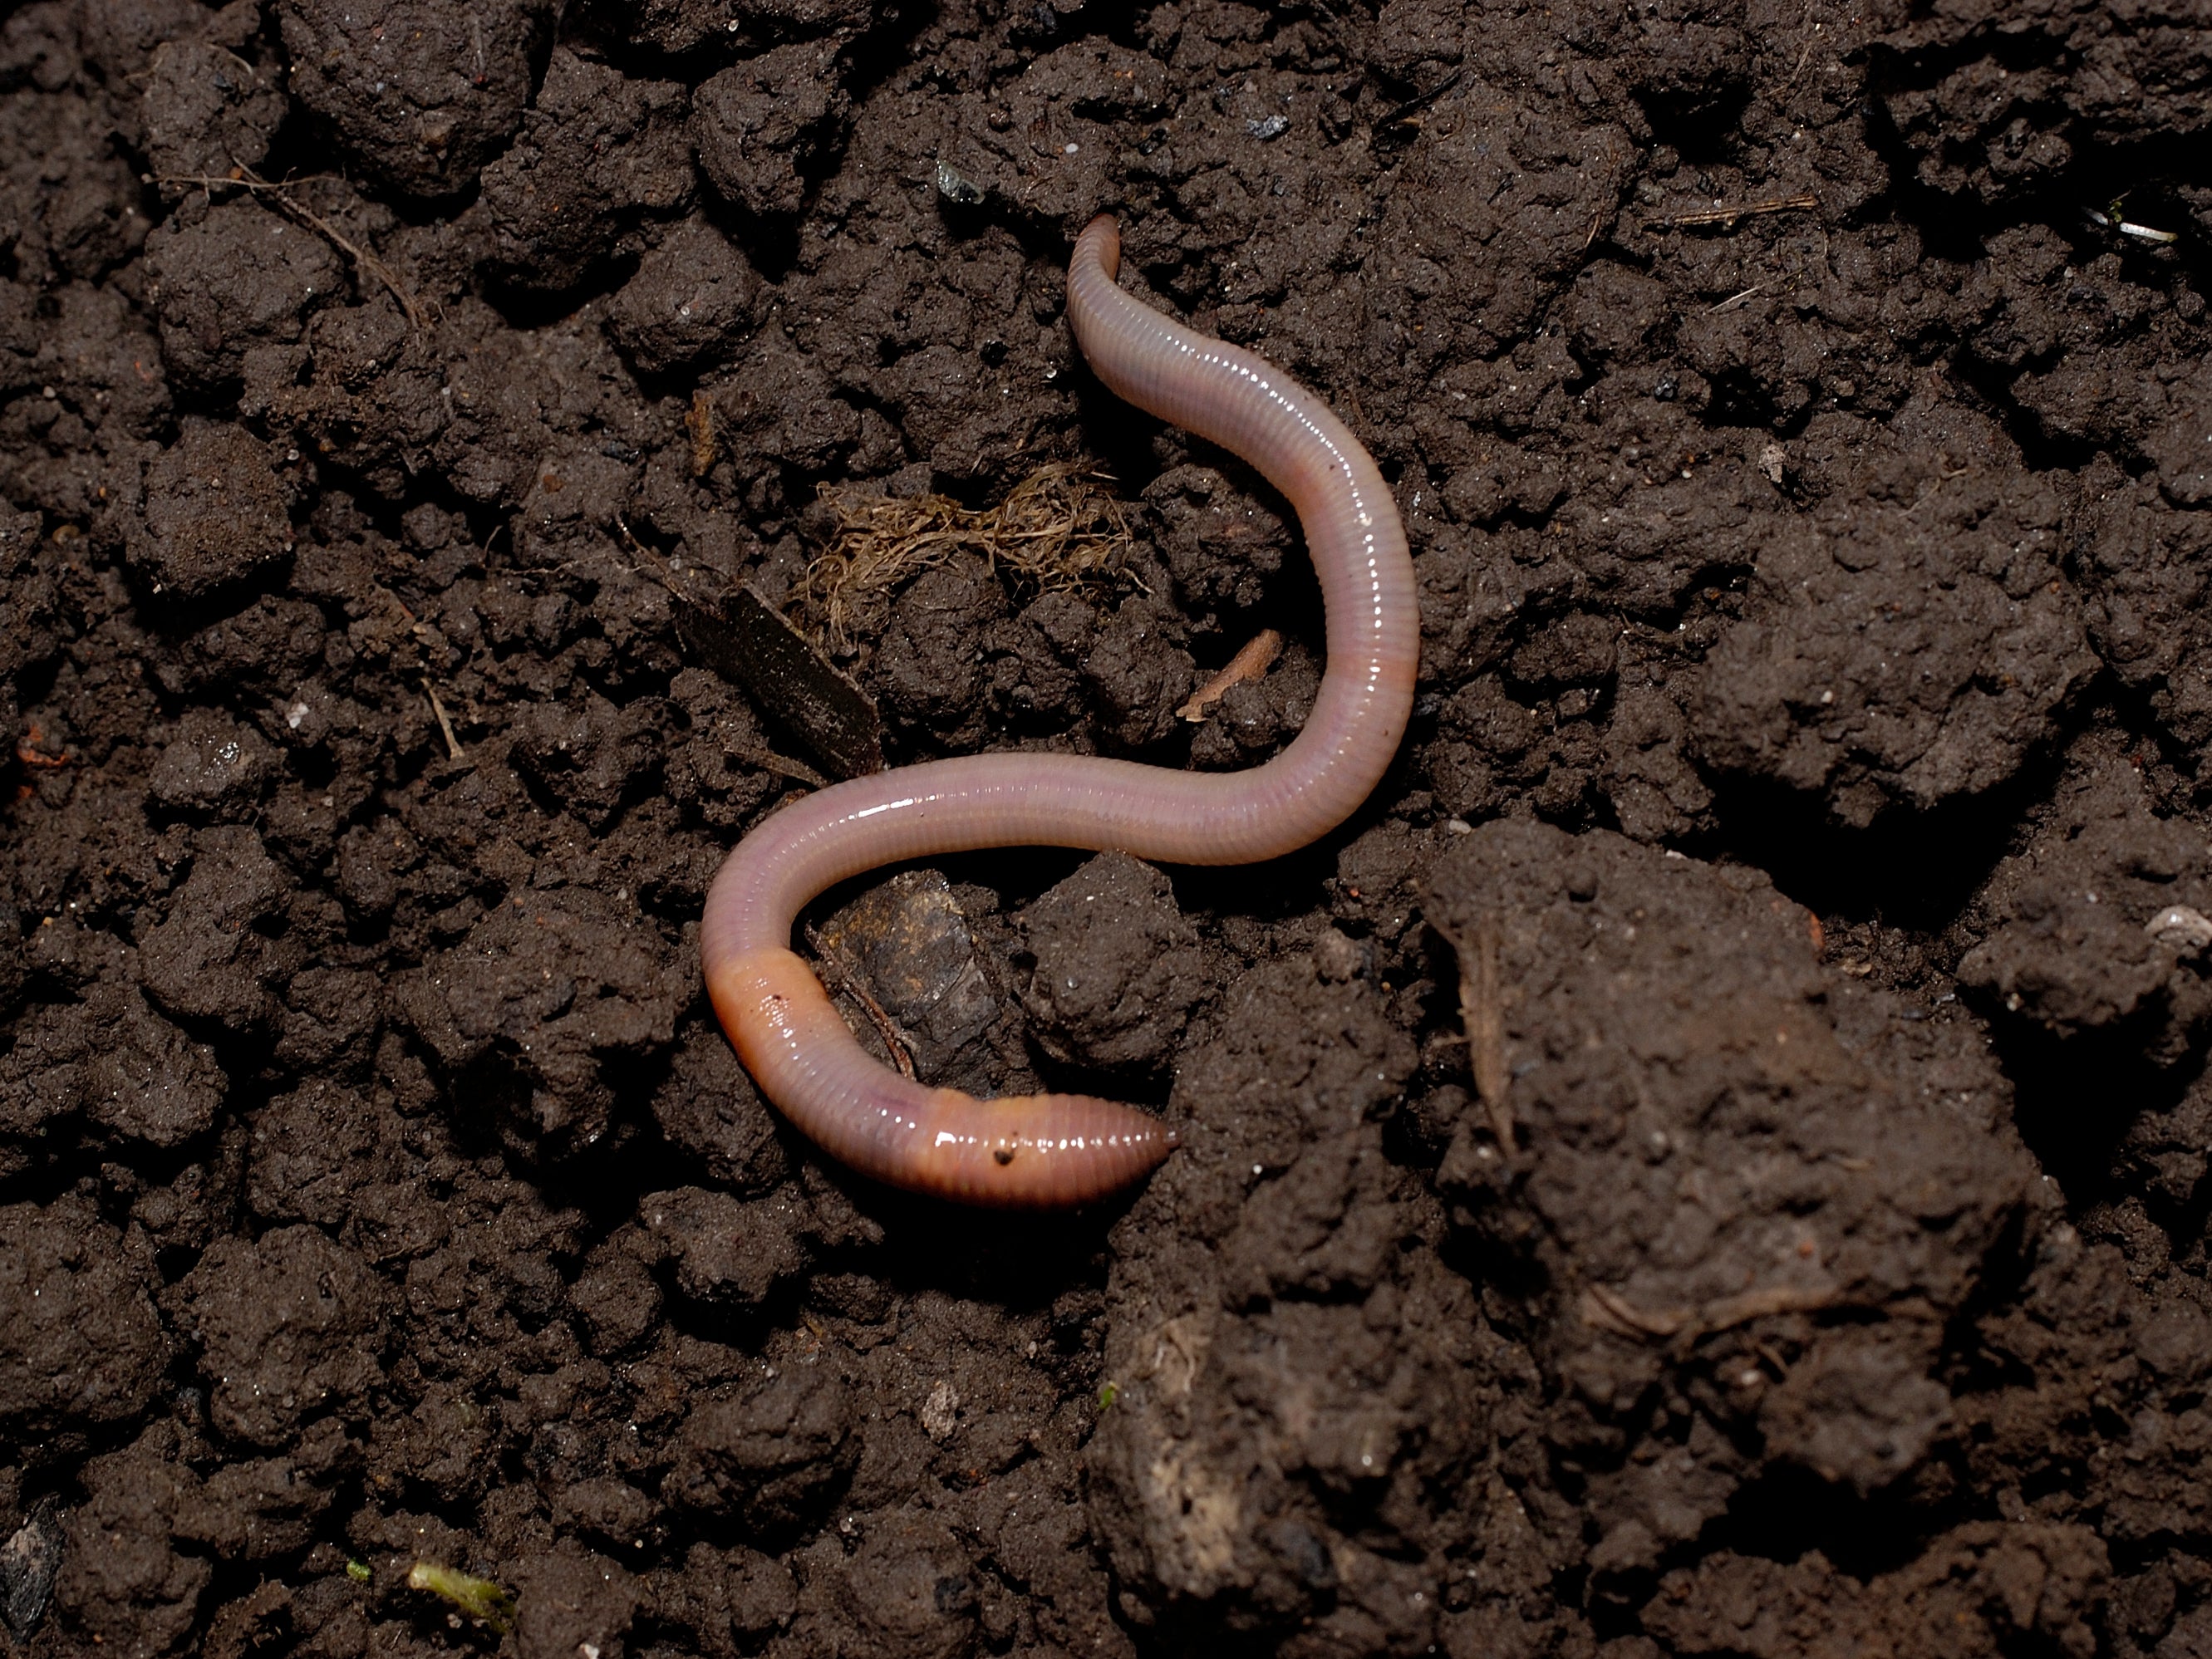 If the soil is rich in food, or compact, worms will in effect eat their way to the surface